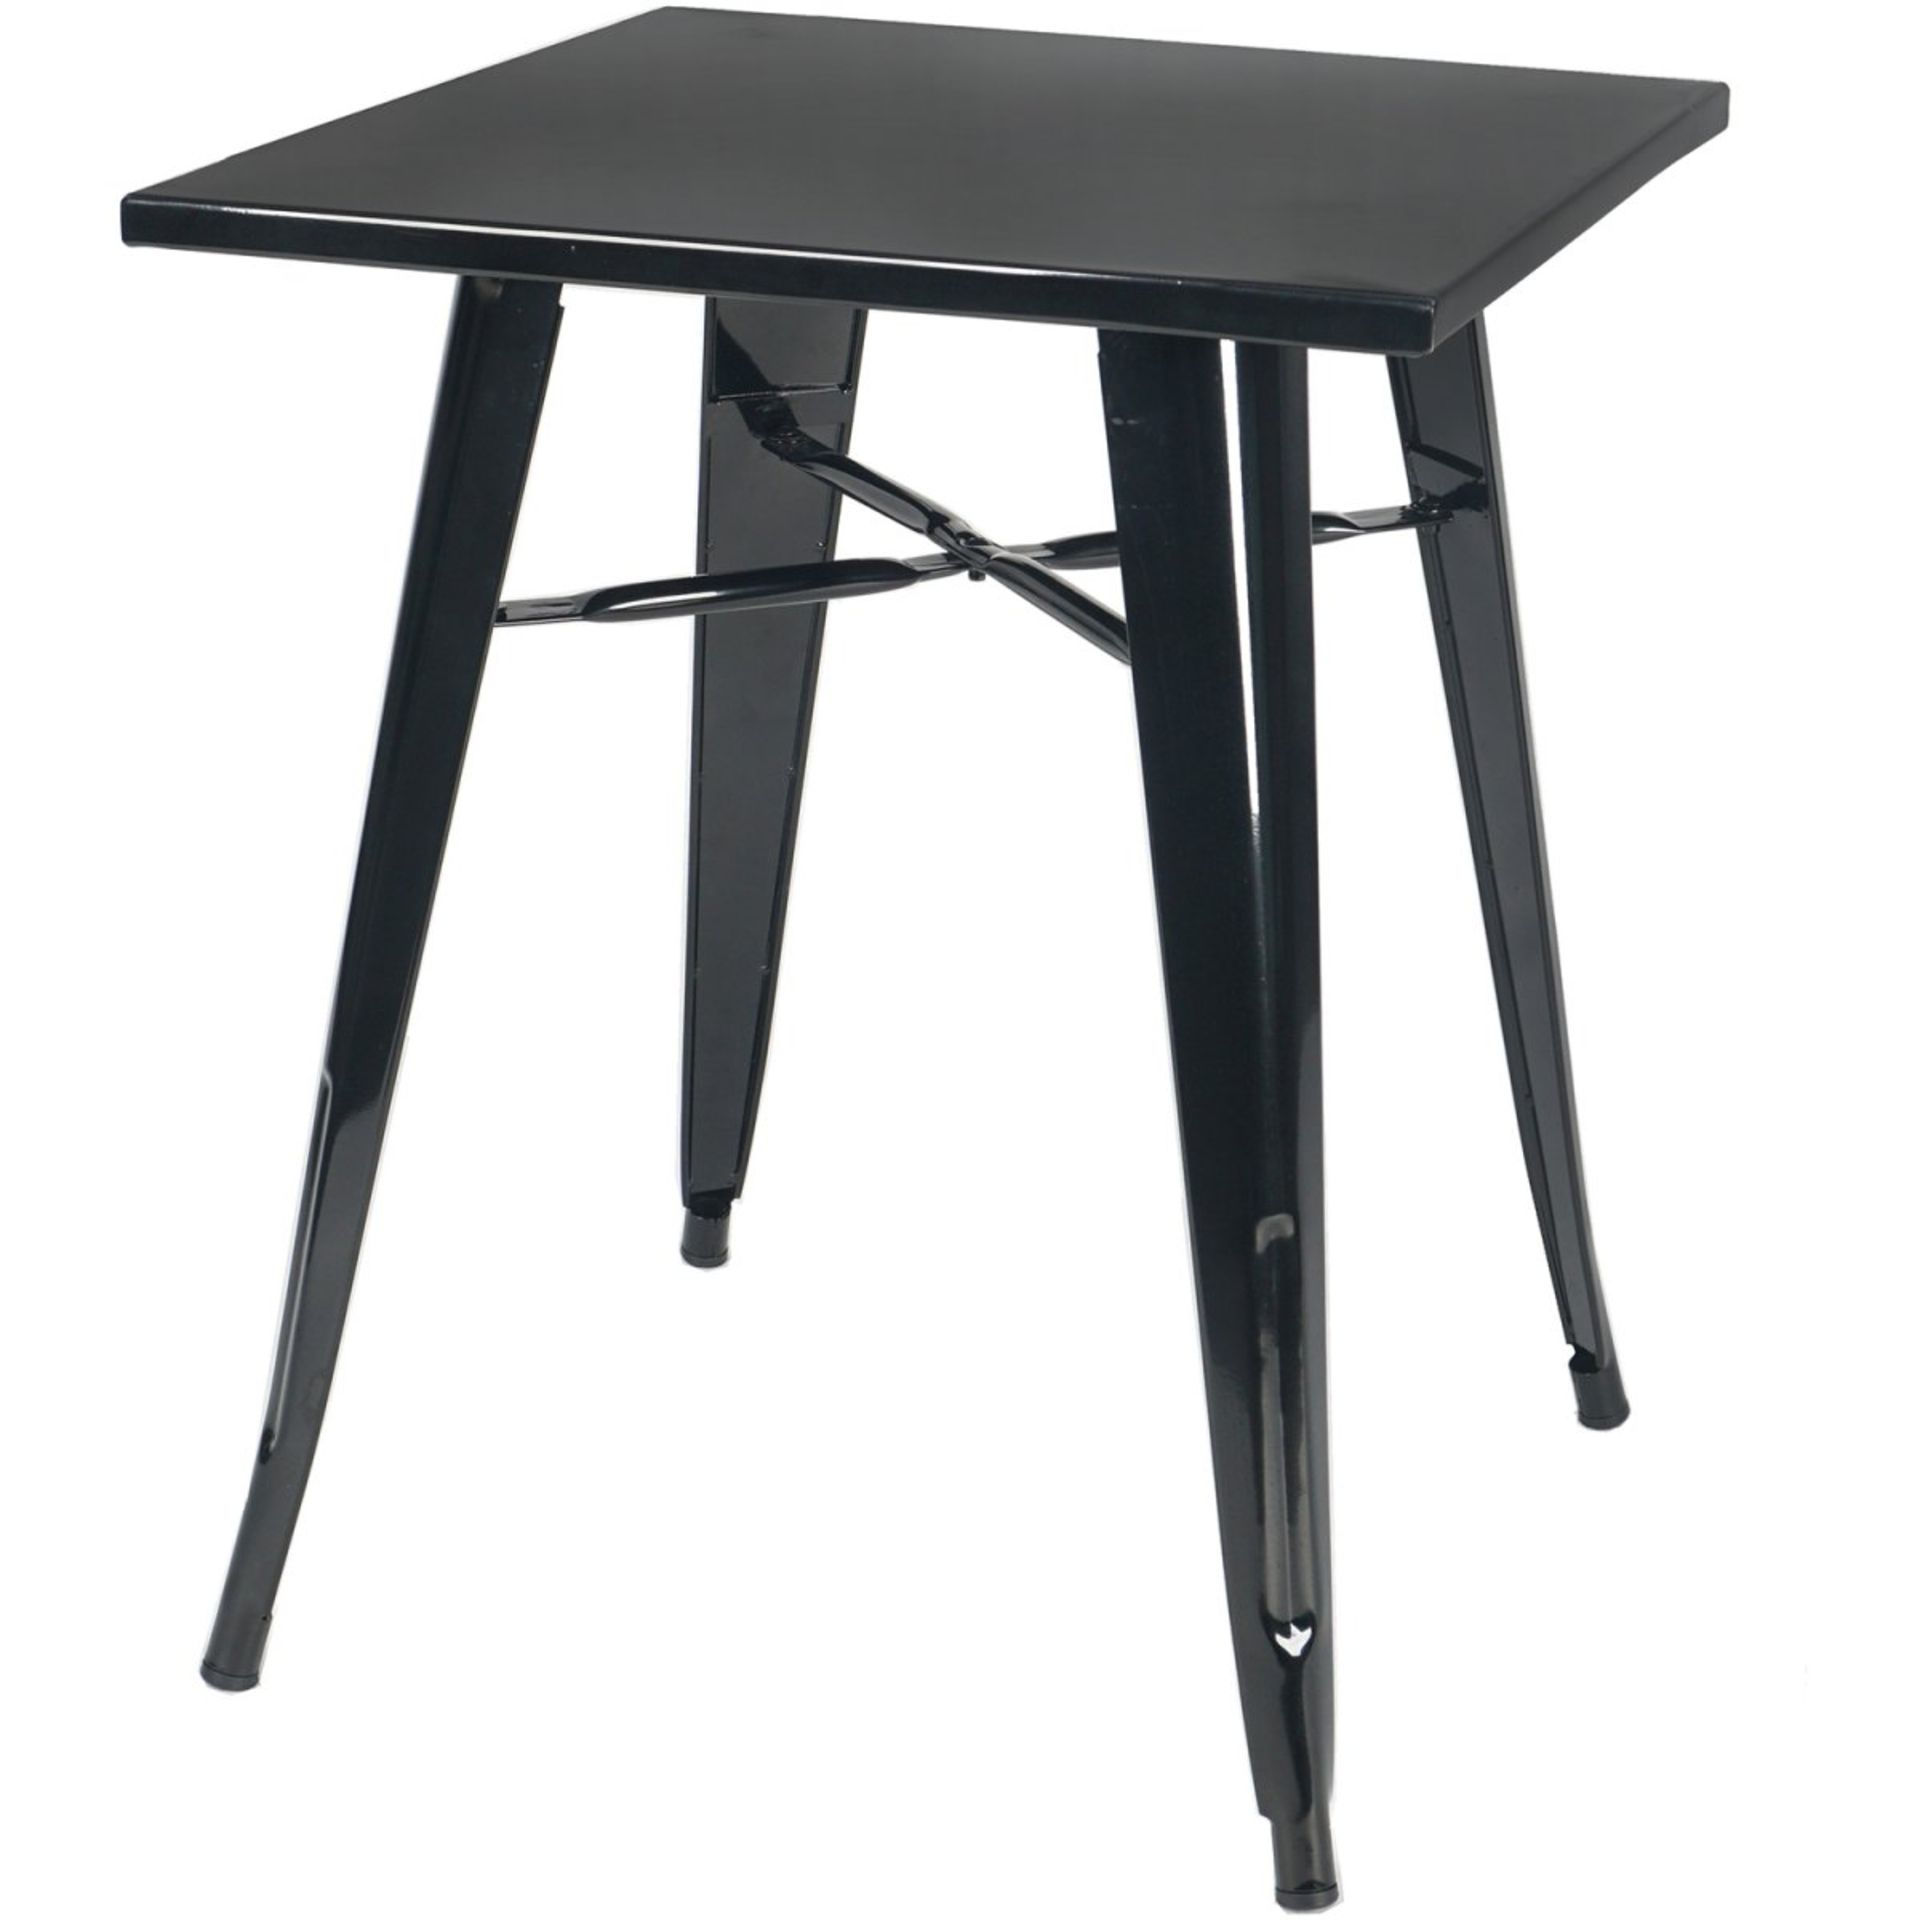 1 x Tolix Industrial Style Outdoor Bistro Table and Chair Set in Black - Includes 1 x Table and 4 - Image 6 of 7